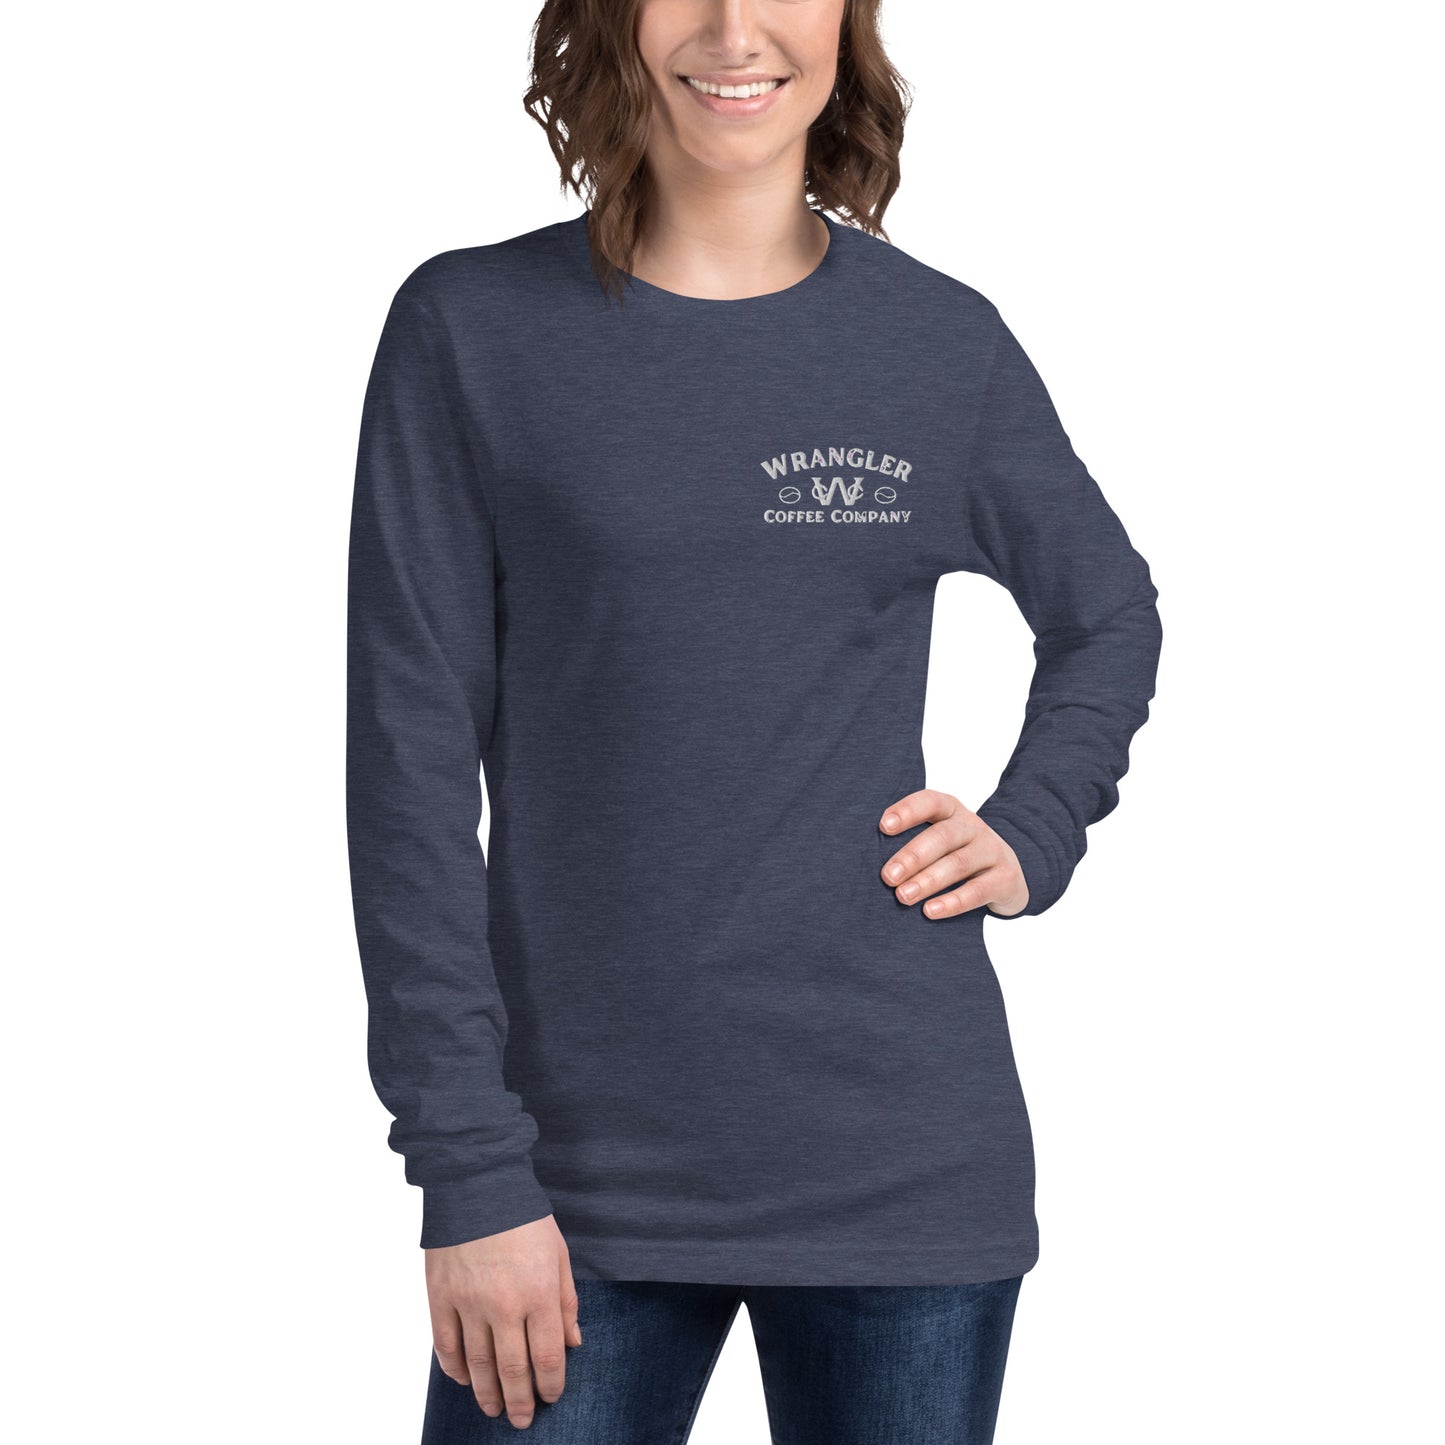 Women's Embroidered Long Sleeve Tee